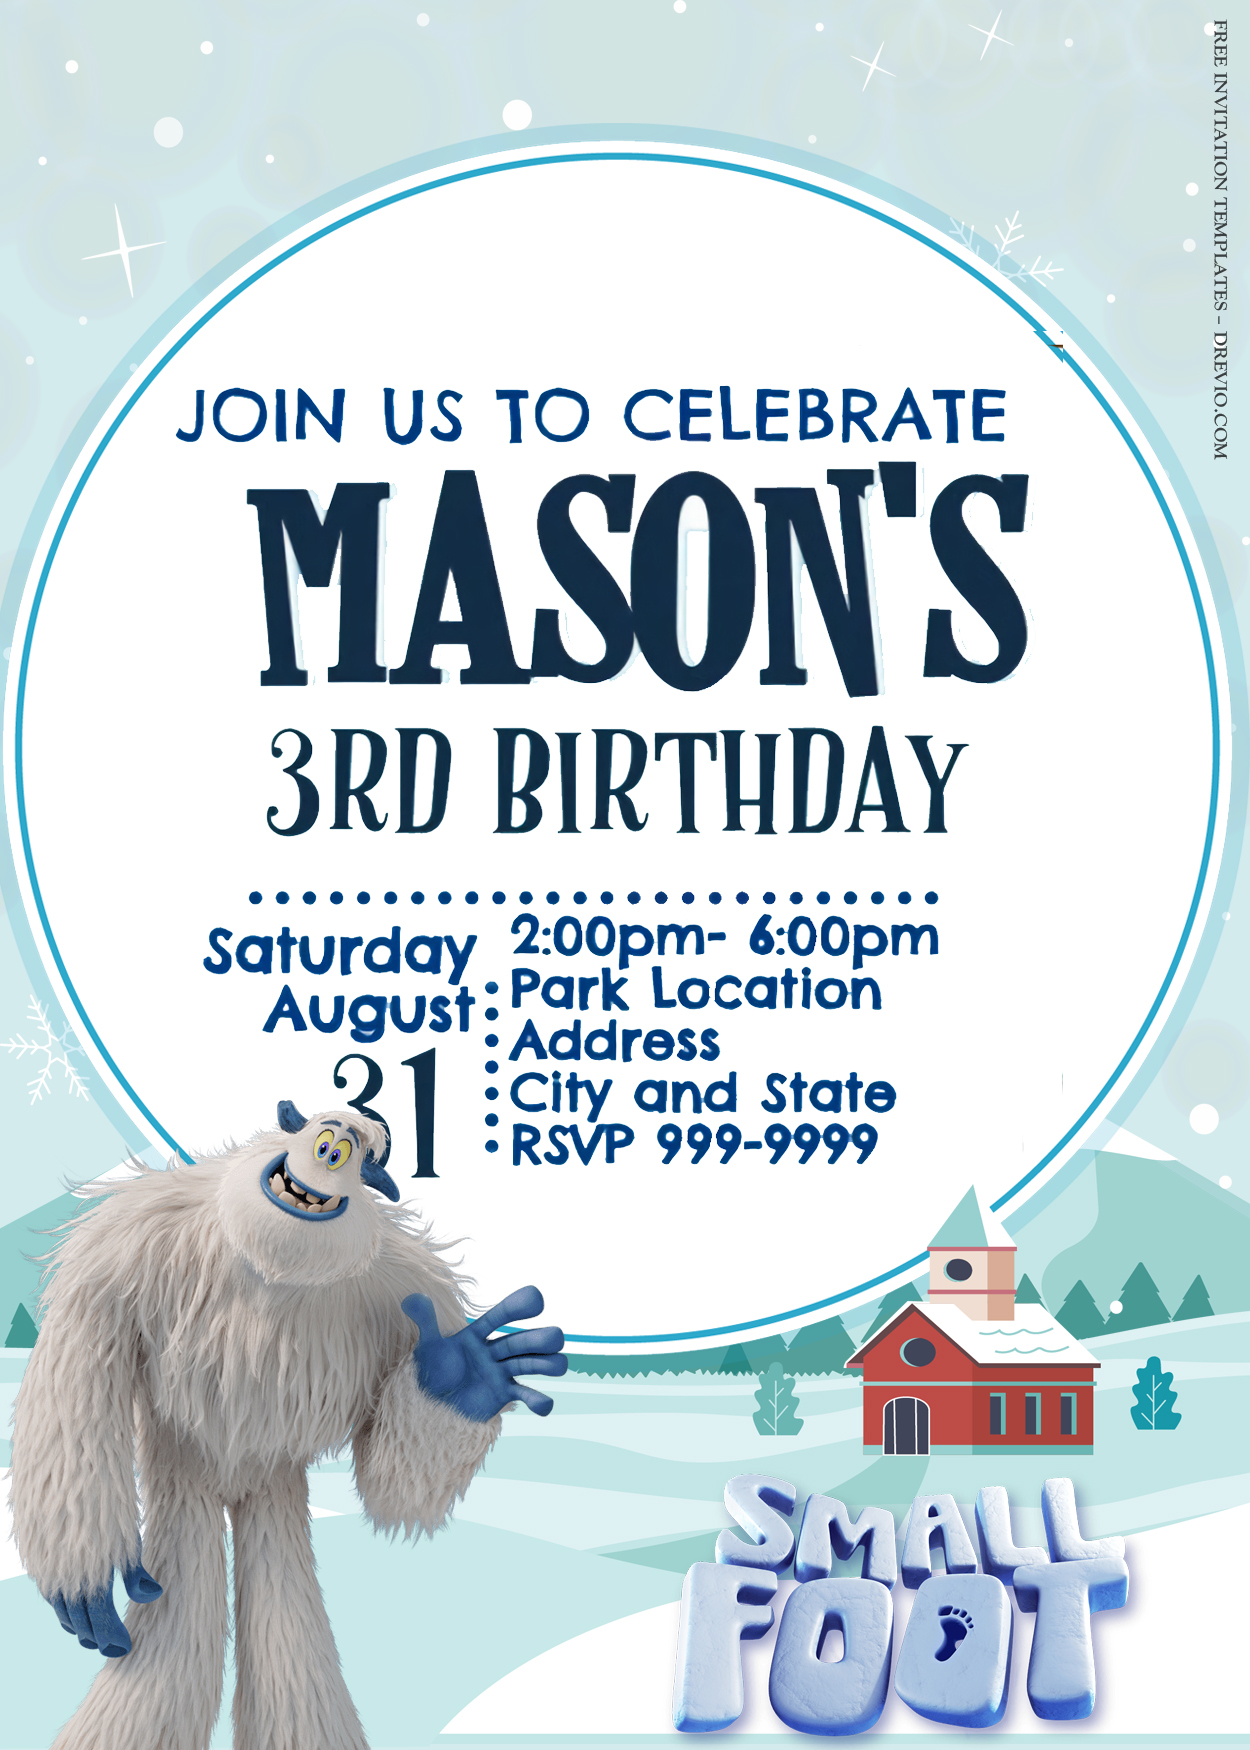 7+ Small Foot With The Big Kind Foot Birthday Invitation Templates Title